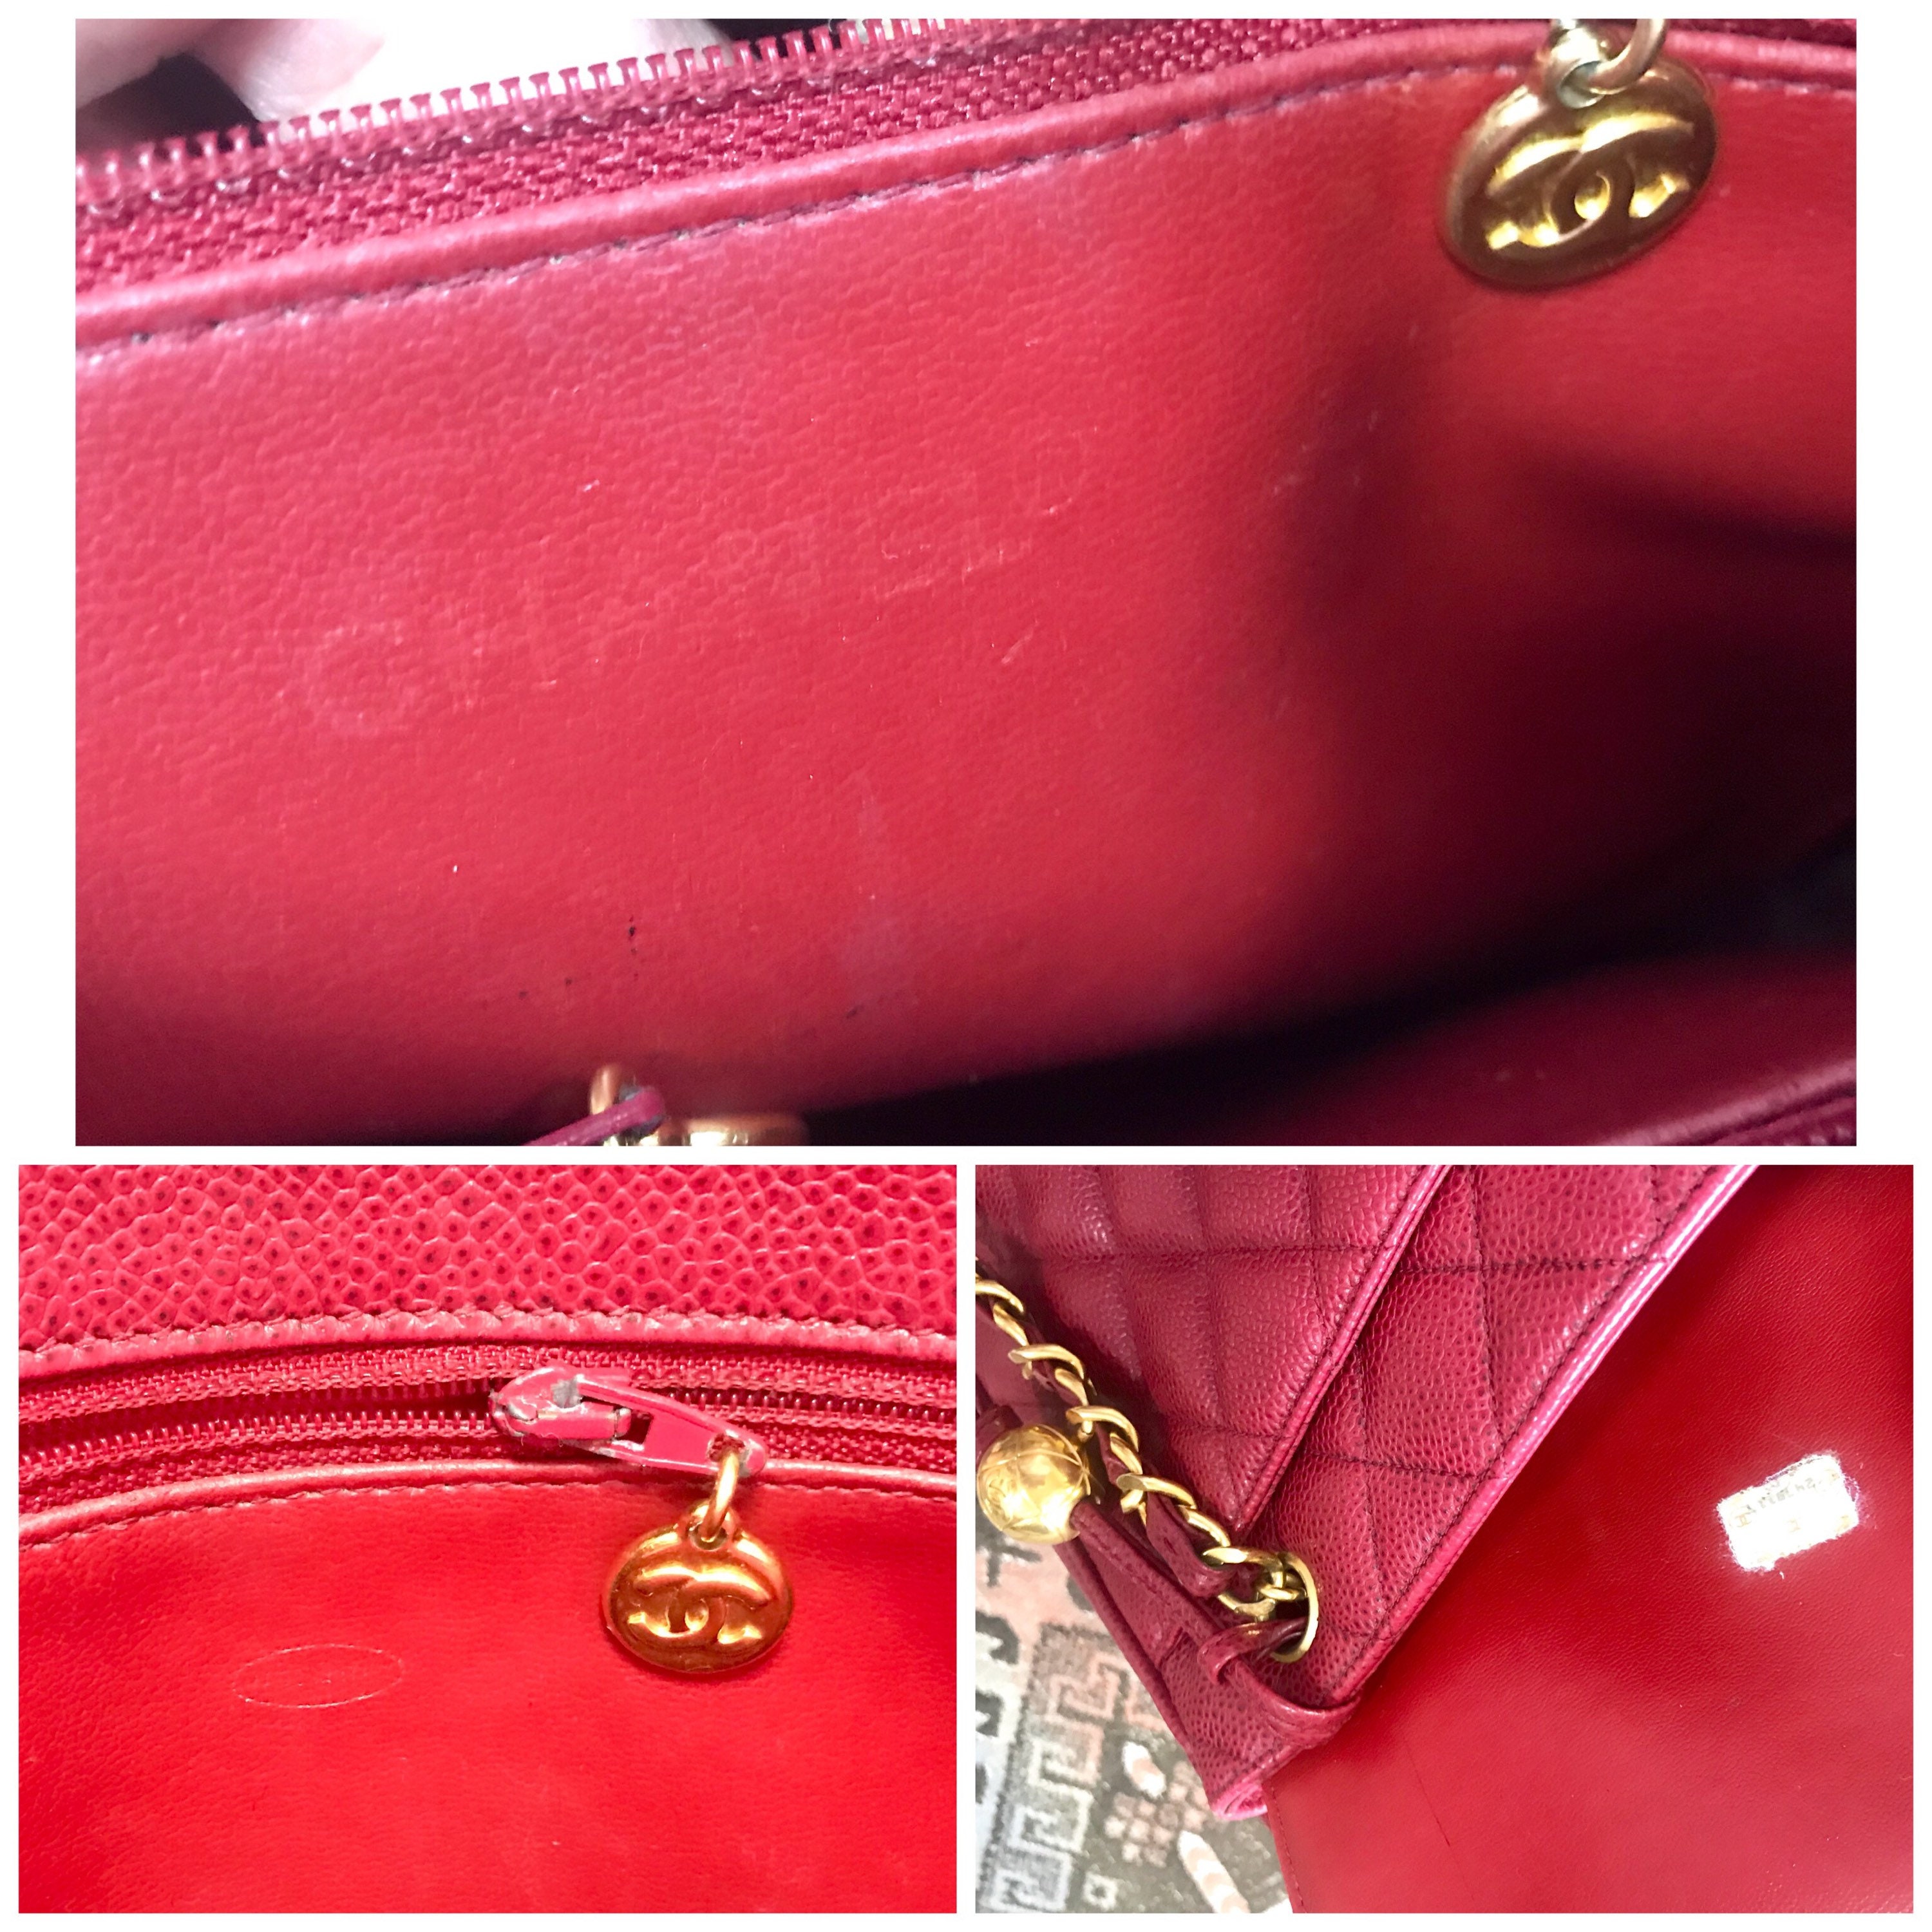 Vintage CHANEL Cherry Red Caviar Leather Quilted Shoulder Bag 